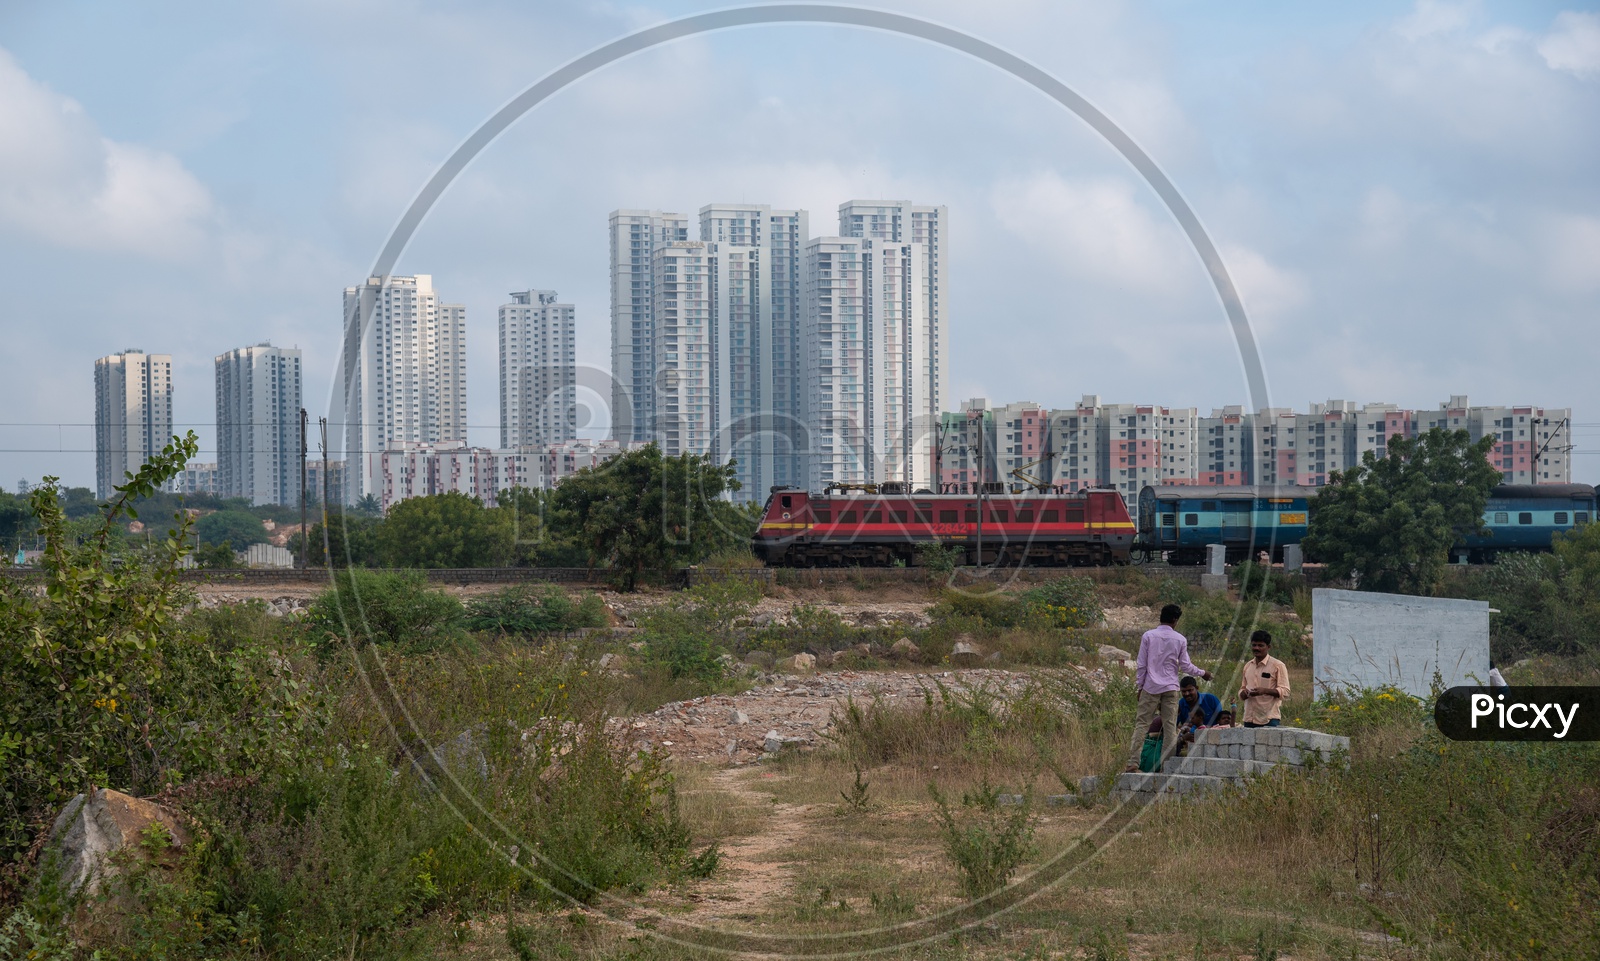 Indian Railways Train with Lodha Apartments in the Background